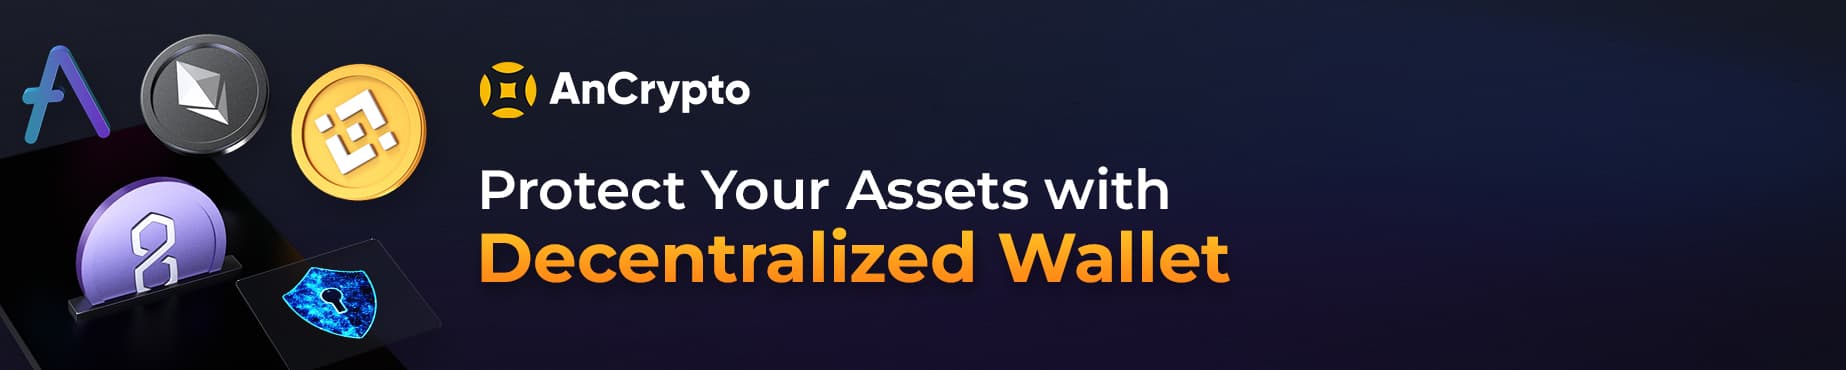 protect your assets with decentralized wallet cta button